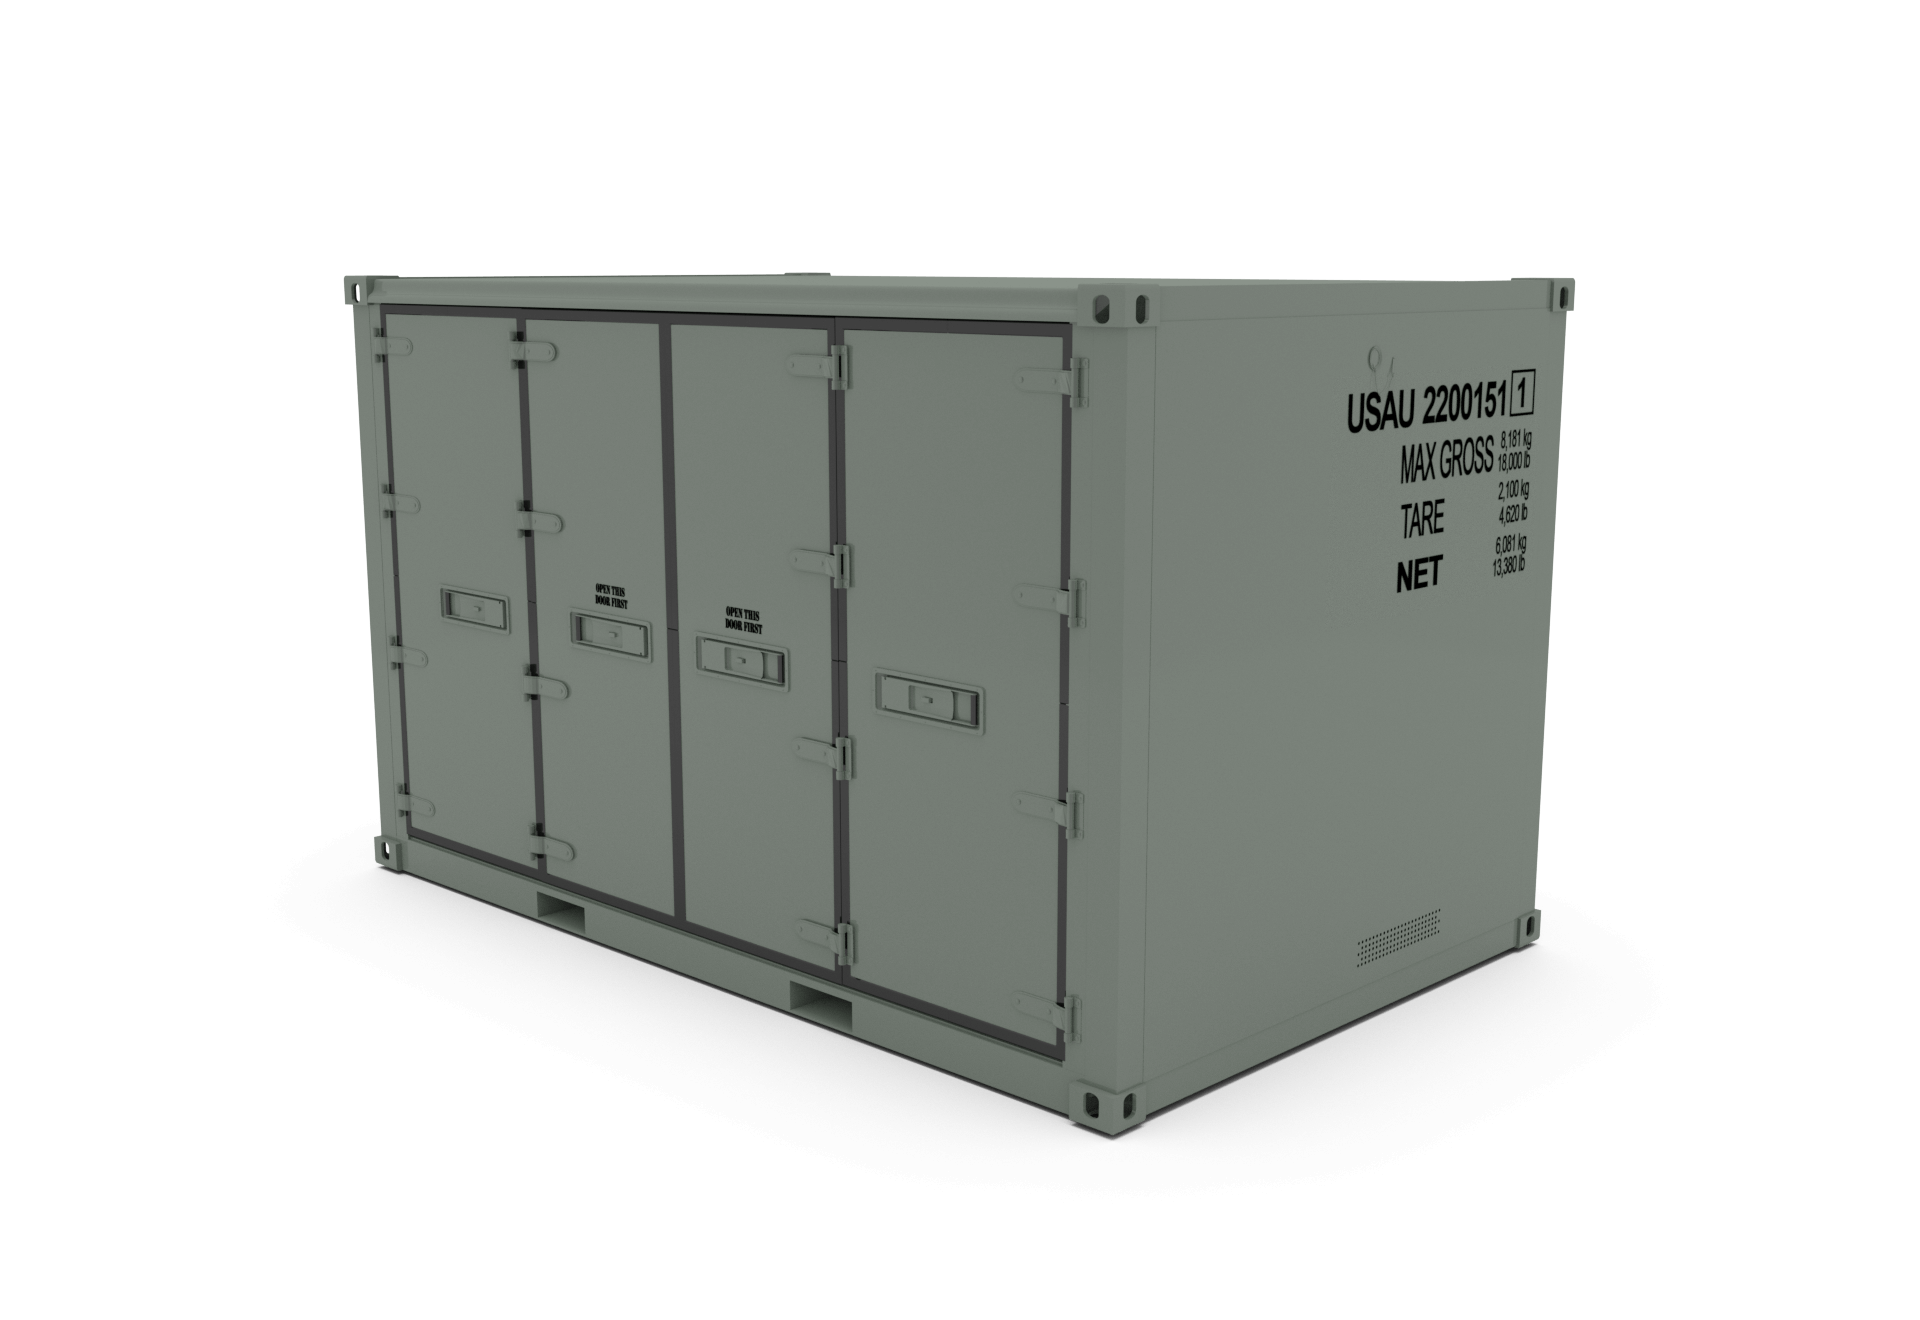 BOH Cargo-12 Container product image